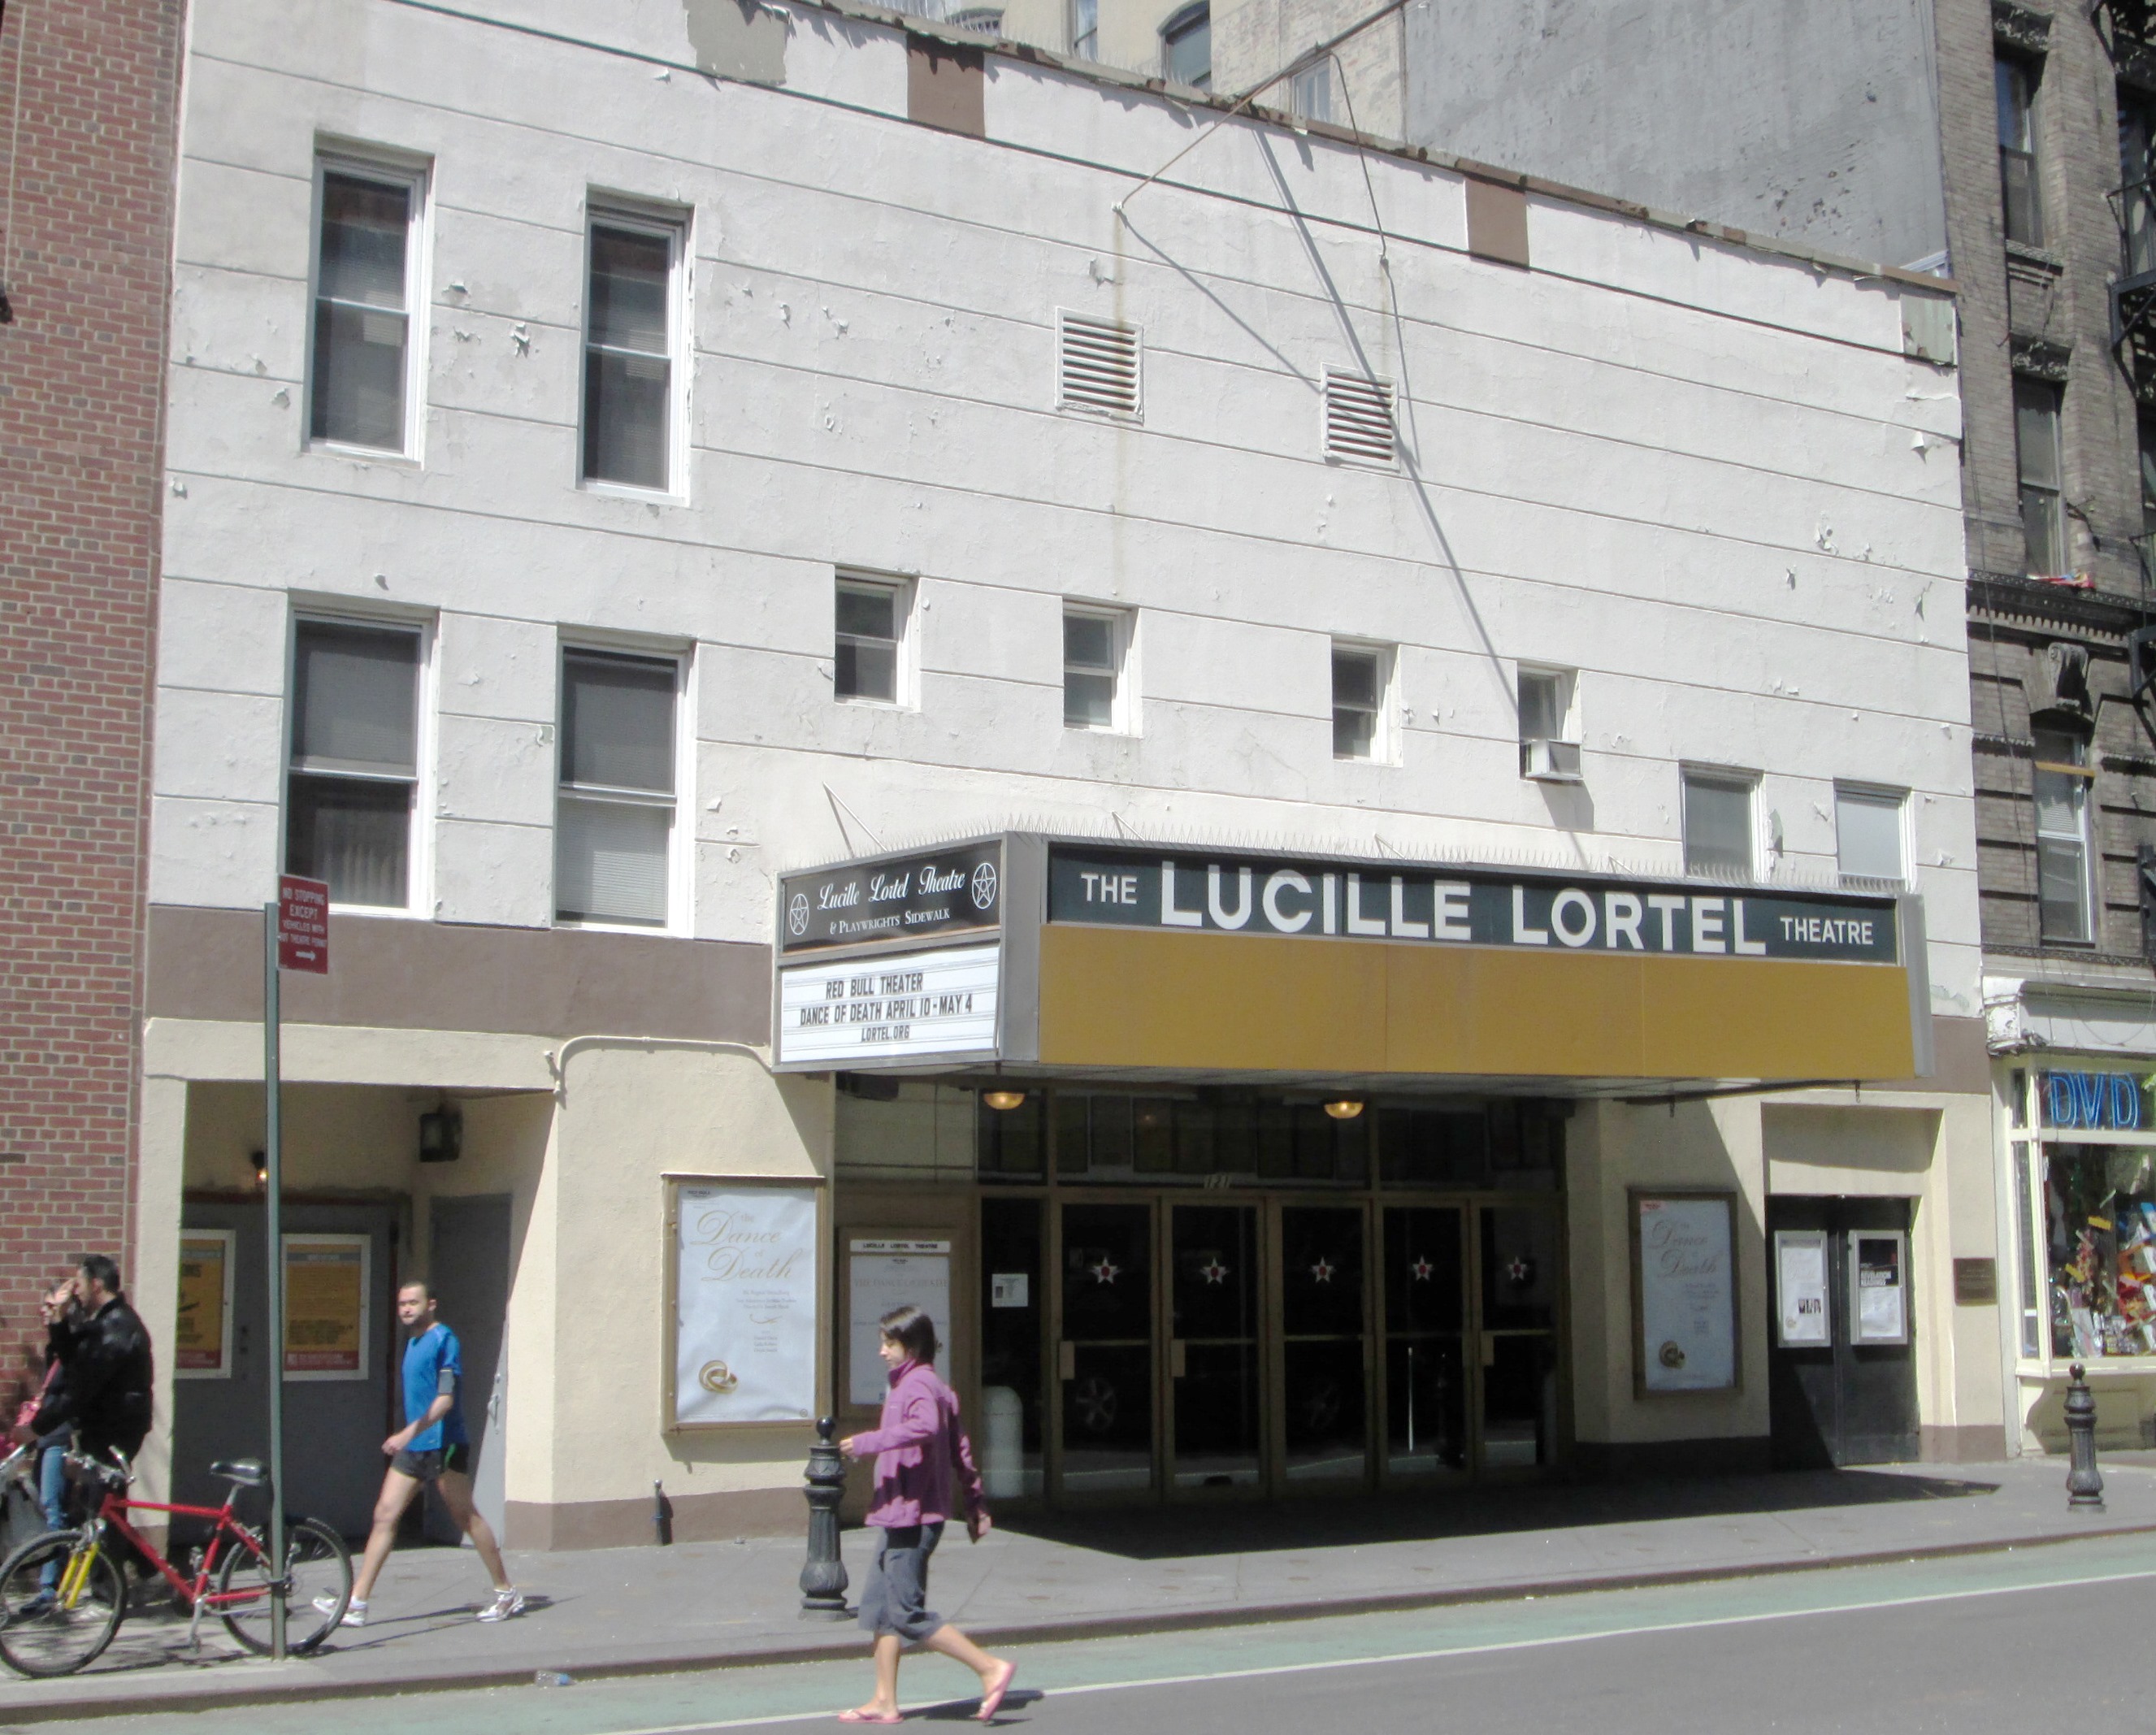 Joey at the Lucille Lortel Theater